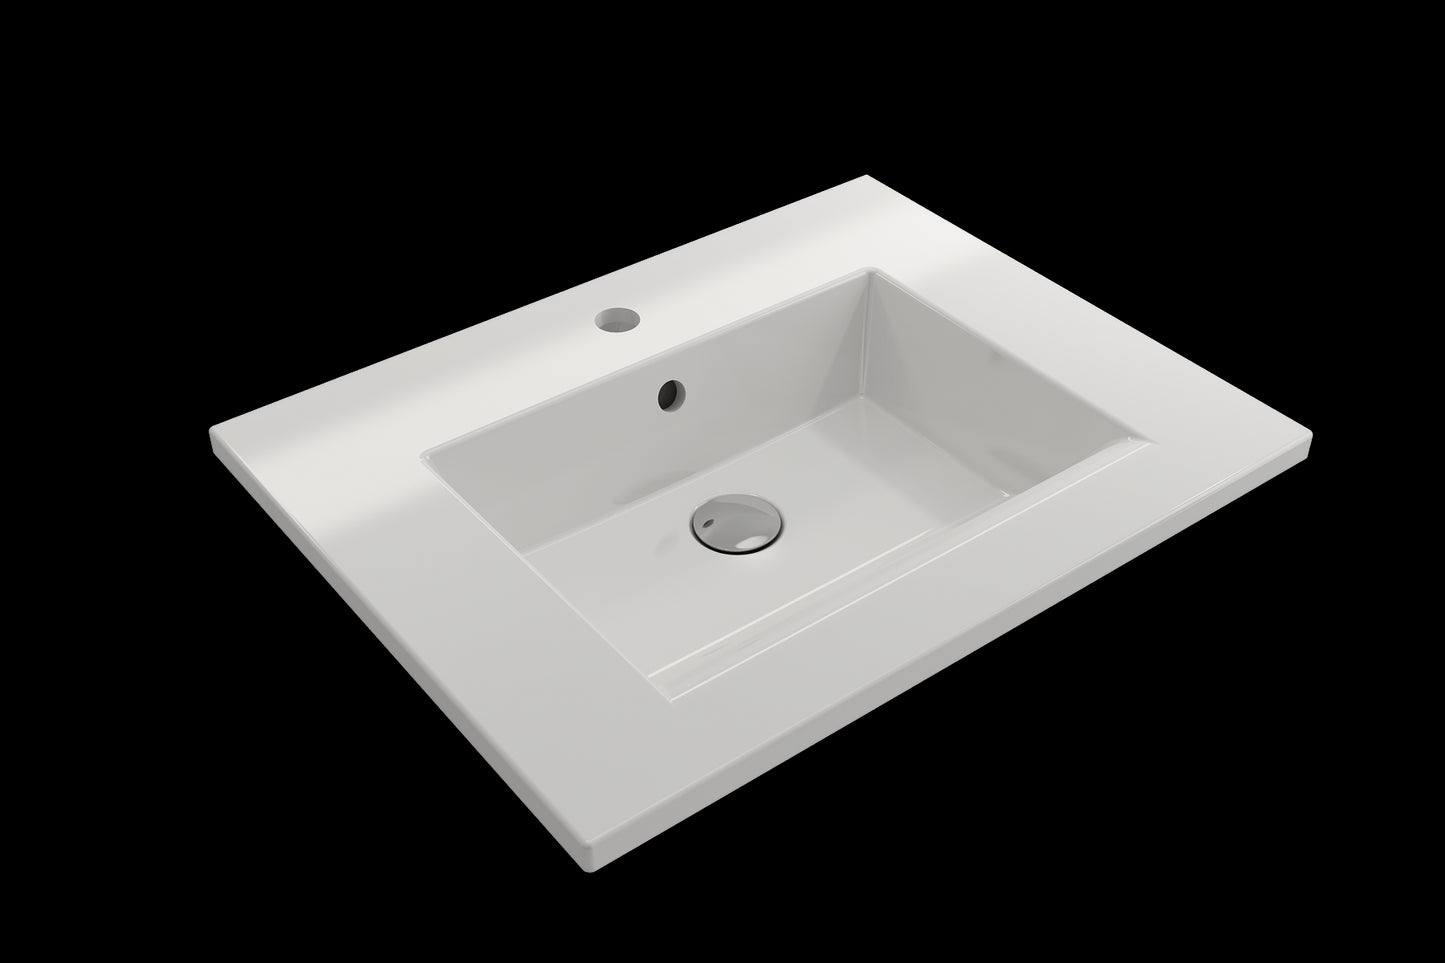 BOCCHI RAVENNA 24.5" Wall-Mounted Sink Fireclay 1-Hole With Overflow